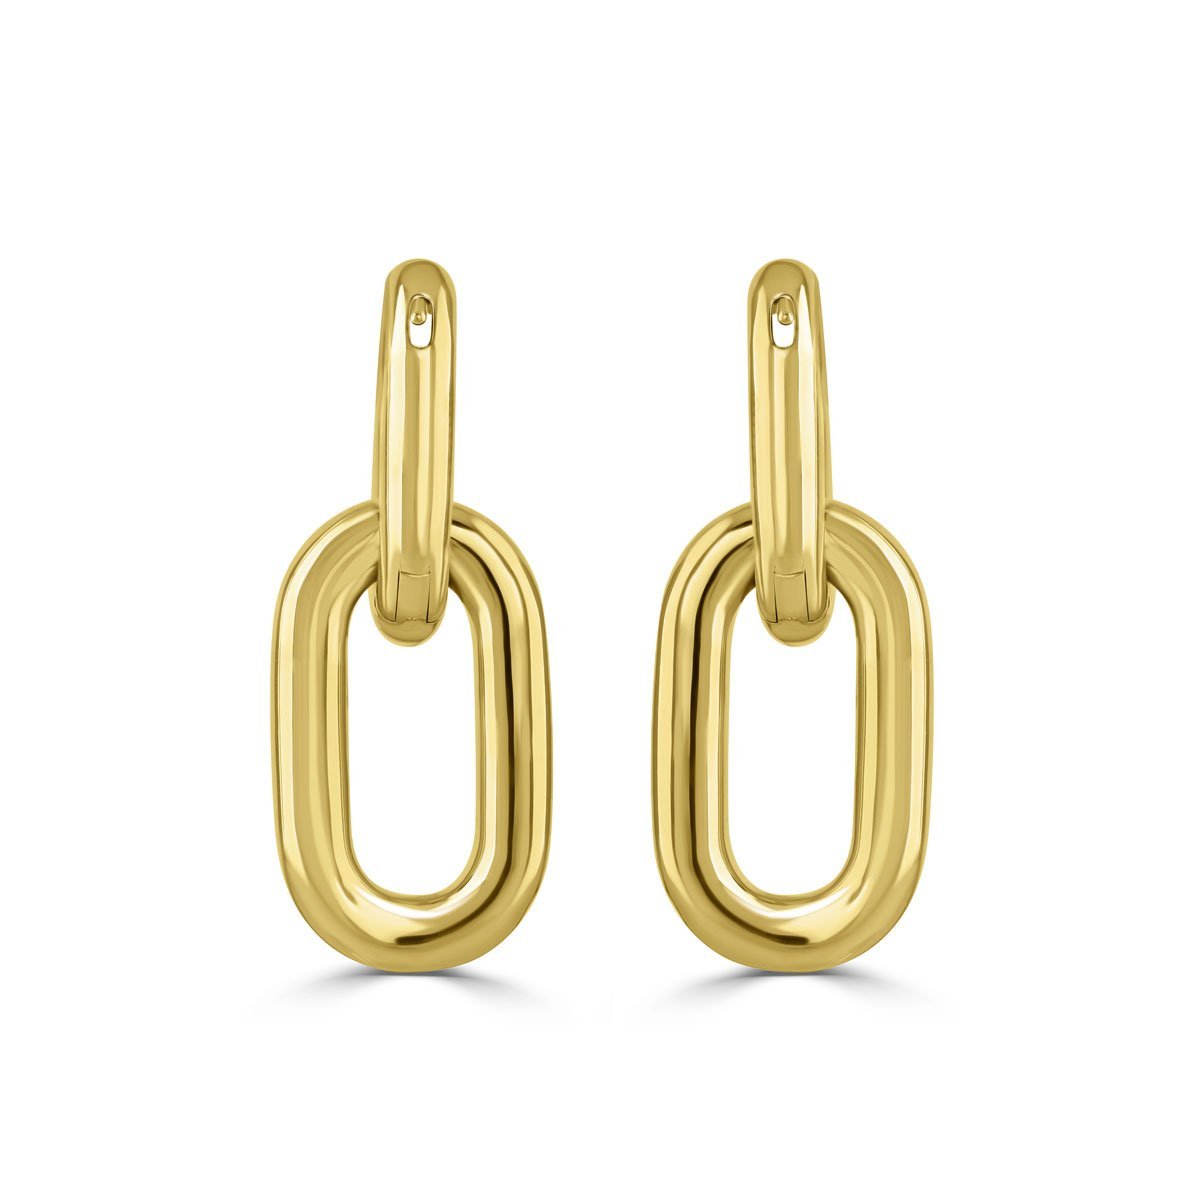 Giallo Yellow Gold Large Link Earrings